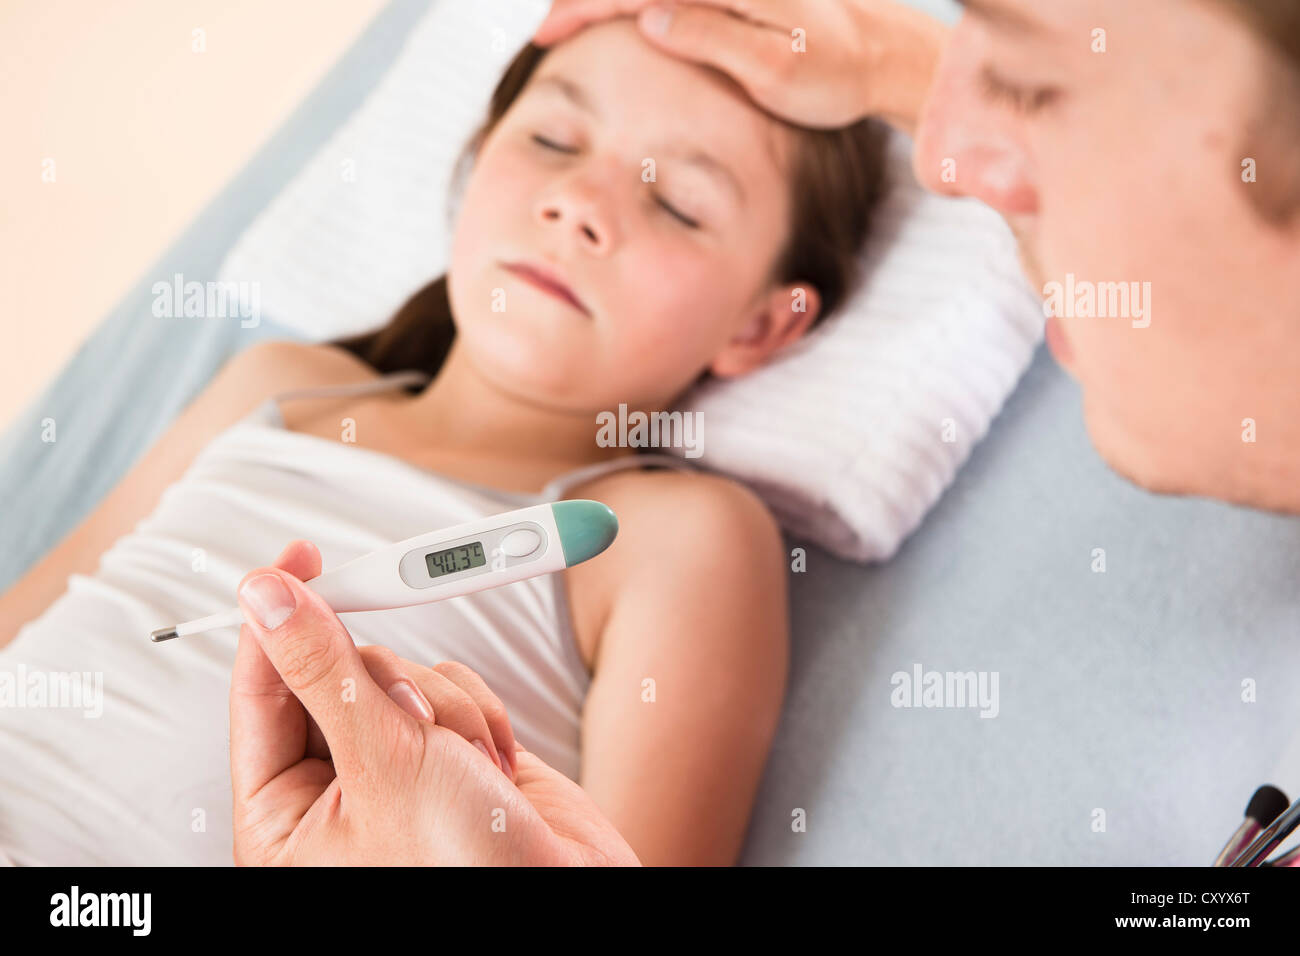 Fever, a pediatrician reading a digital fever thermometer showing concern about the high temperature of a young girl Stock Photo